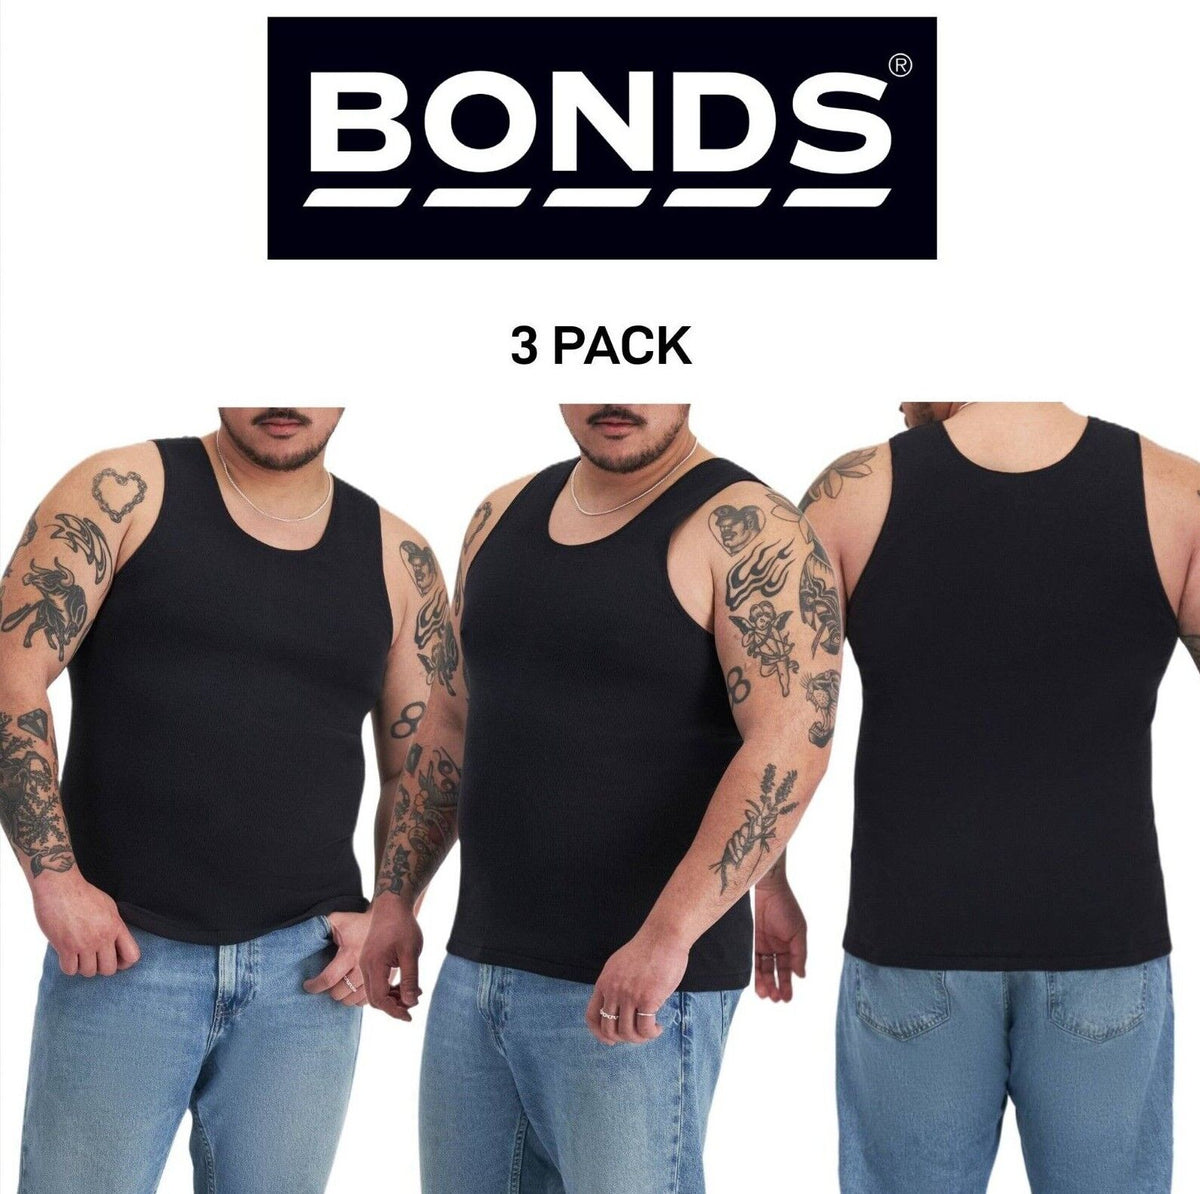 Bonds Mens Chesty Singlets Cotton Side Seamfree Comfortable Fit 3 Pack M757O